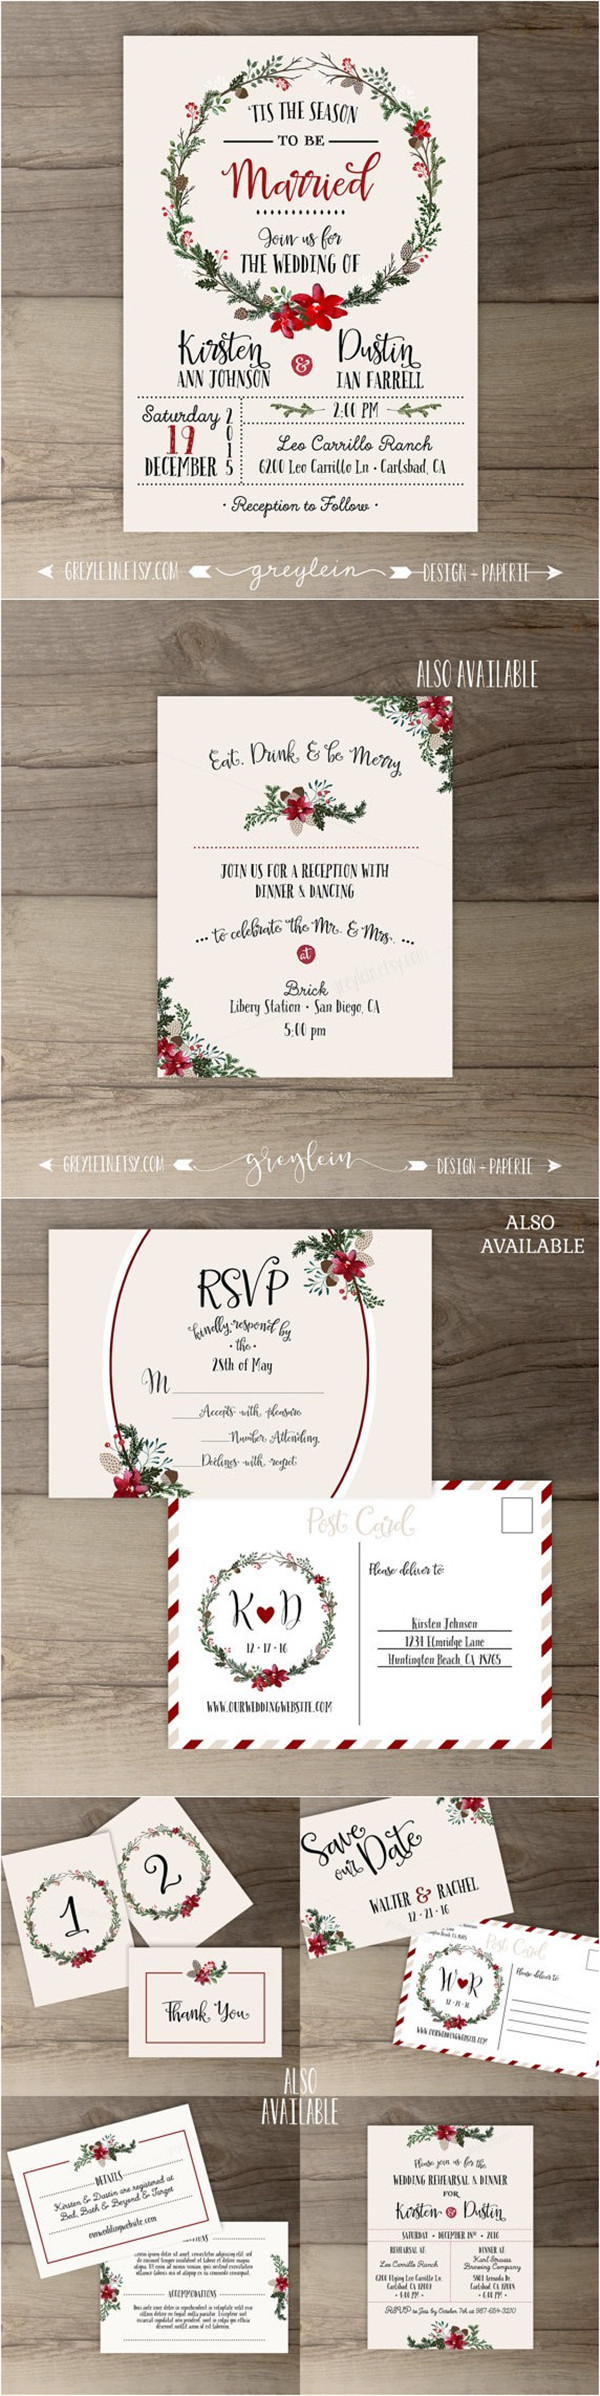 Pinecone and red berry themed Christmas Wedding invitations